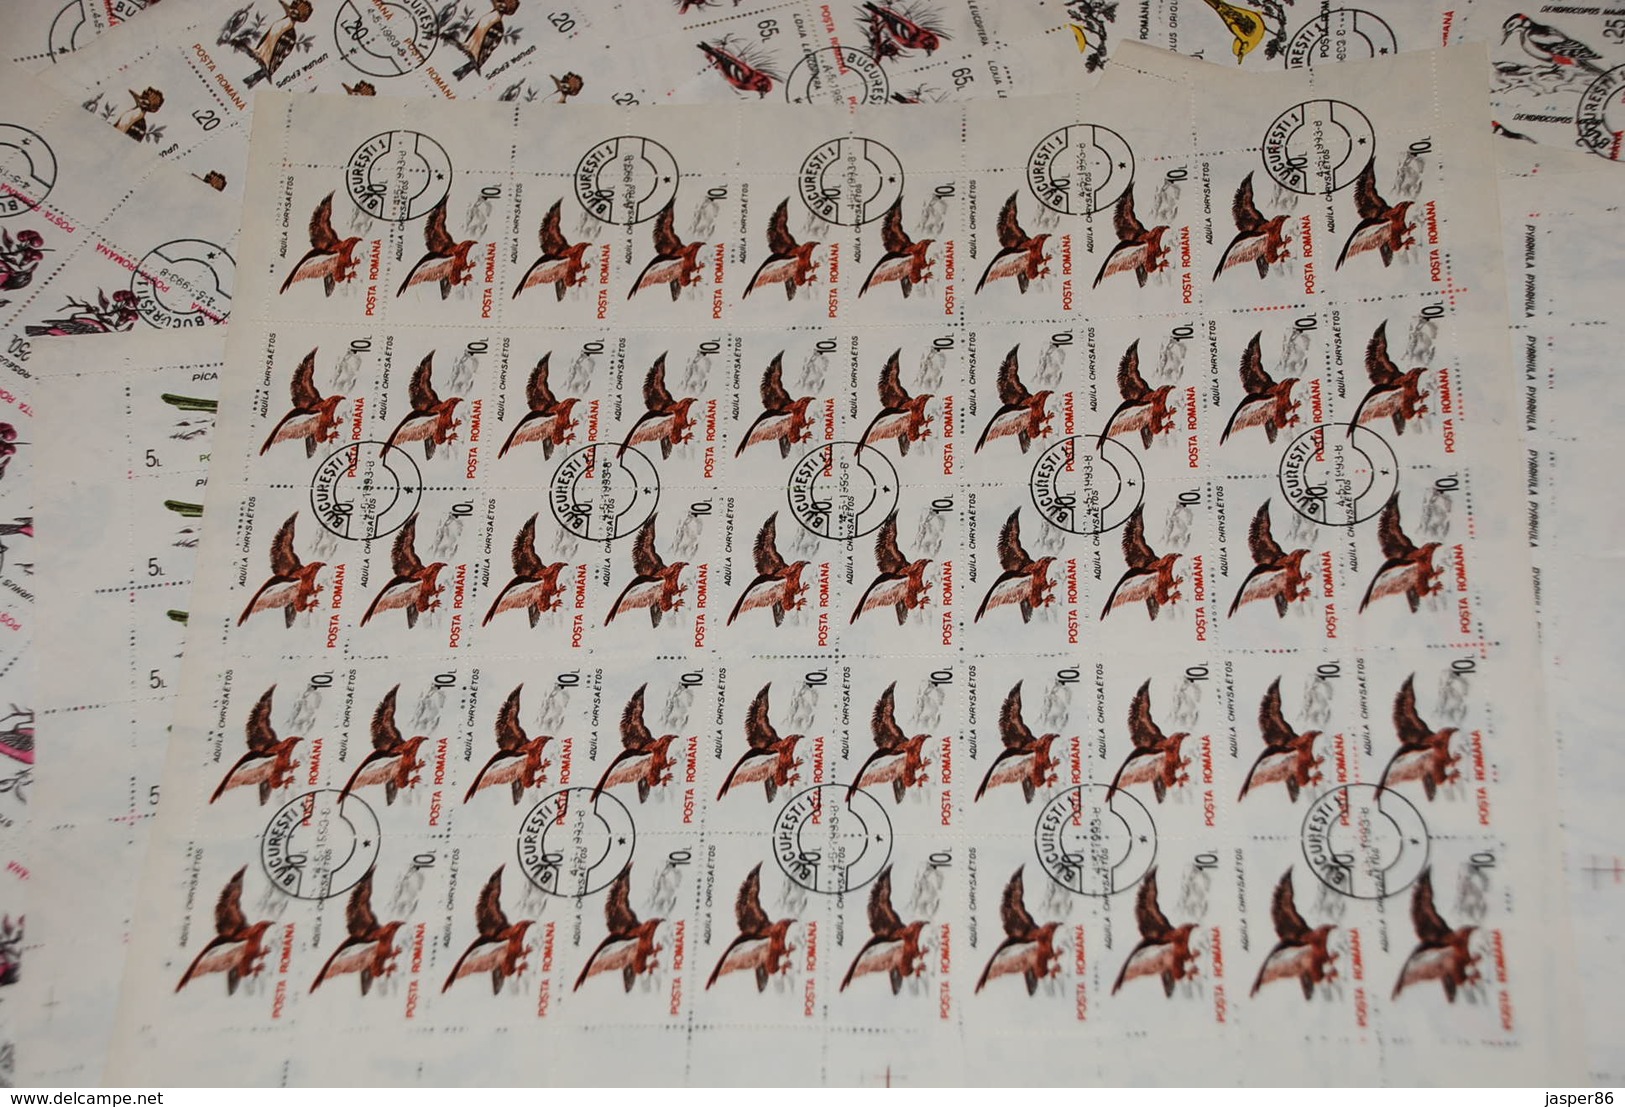 ROMANIA 500 Forest BIRDS Sc 3812-3821, 50 X COMPLETE Sets WHOLESALE CV$100 - Full Sheets & Multiples